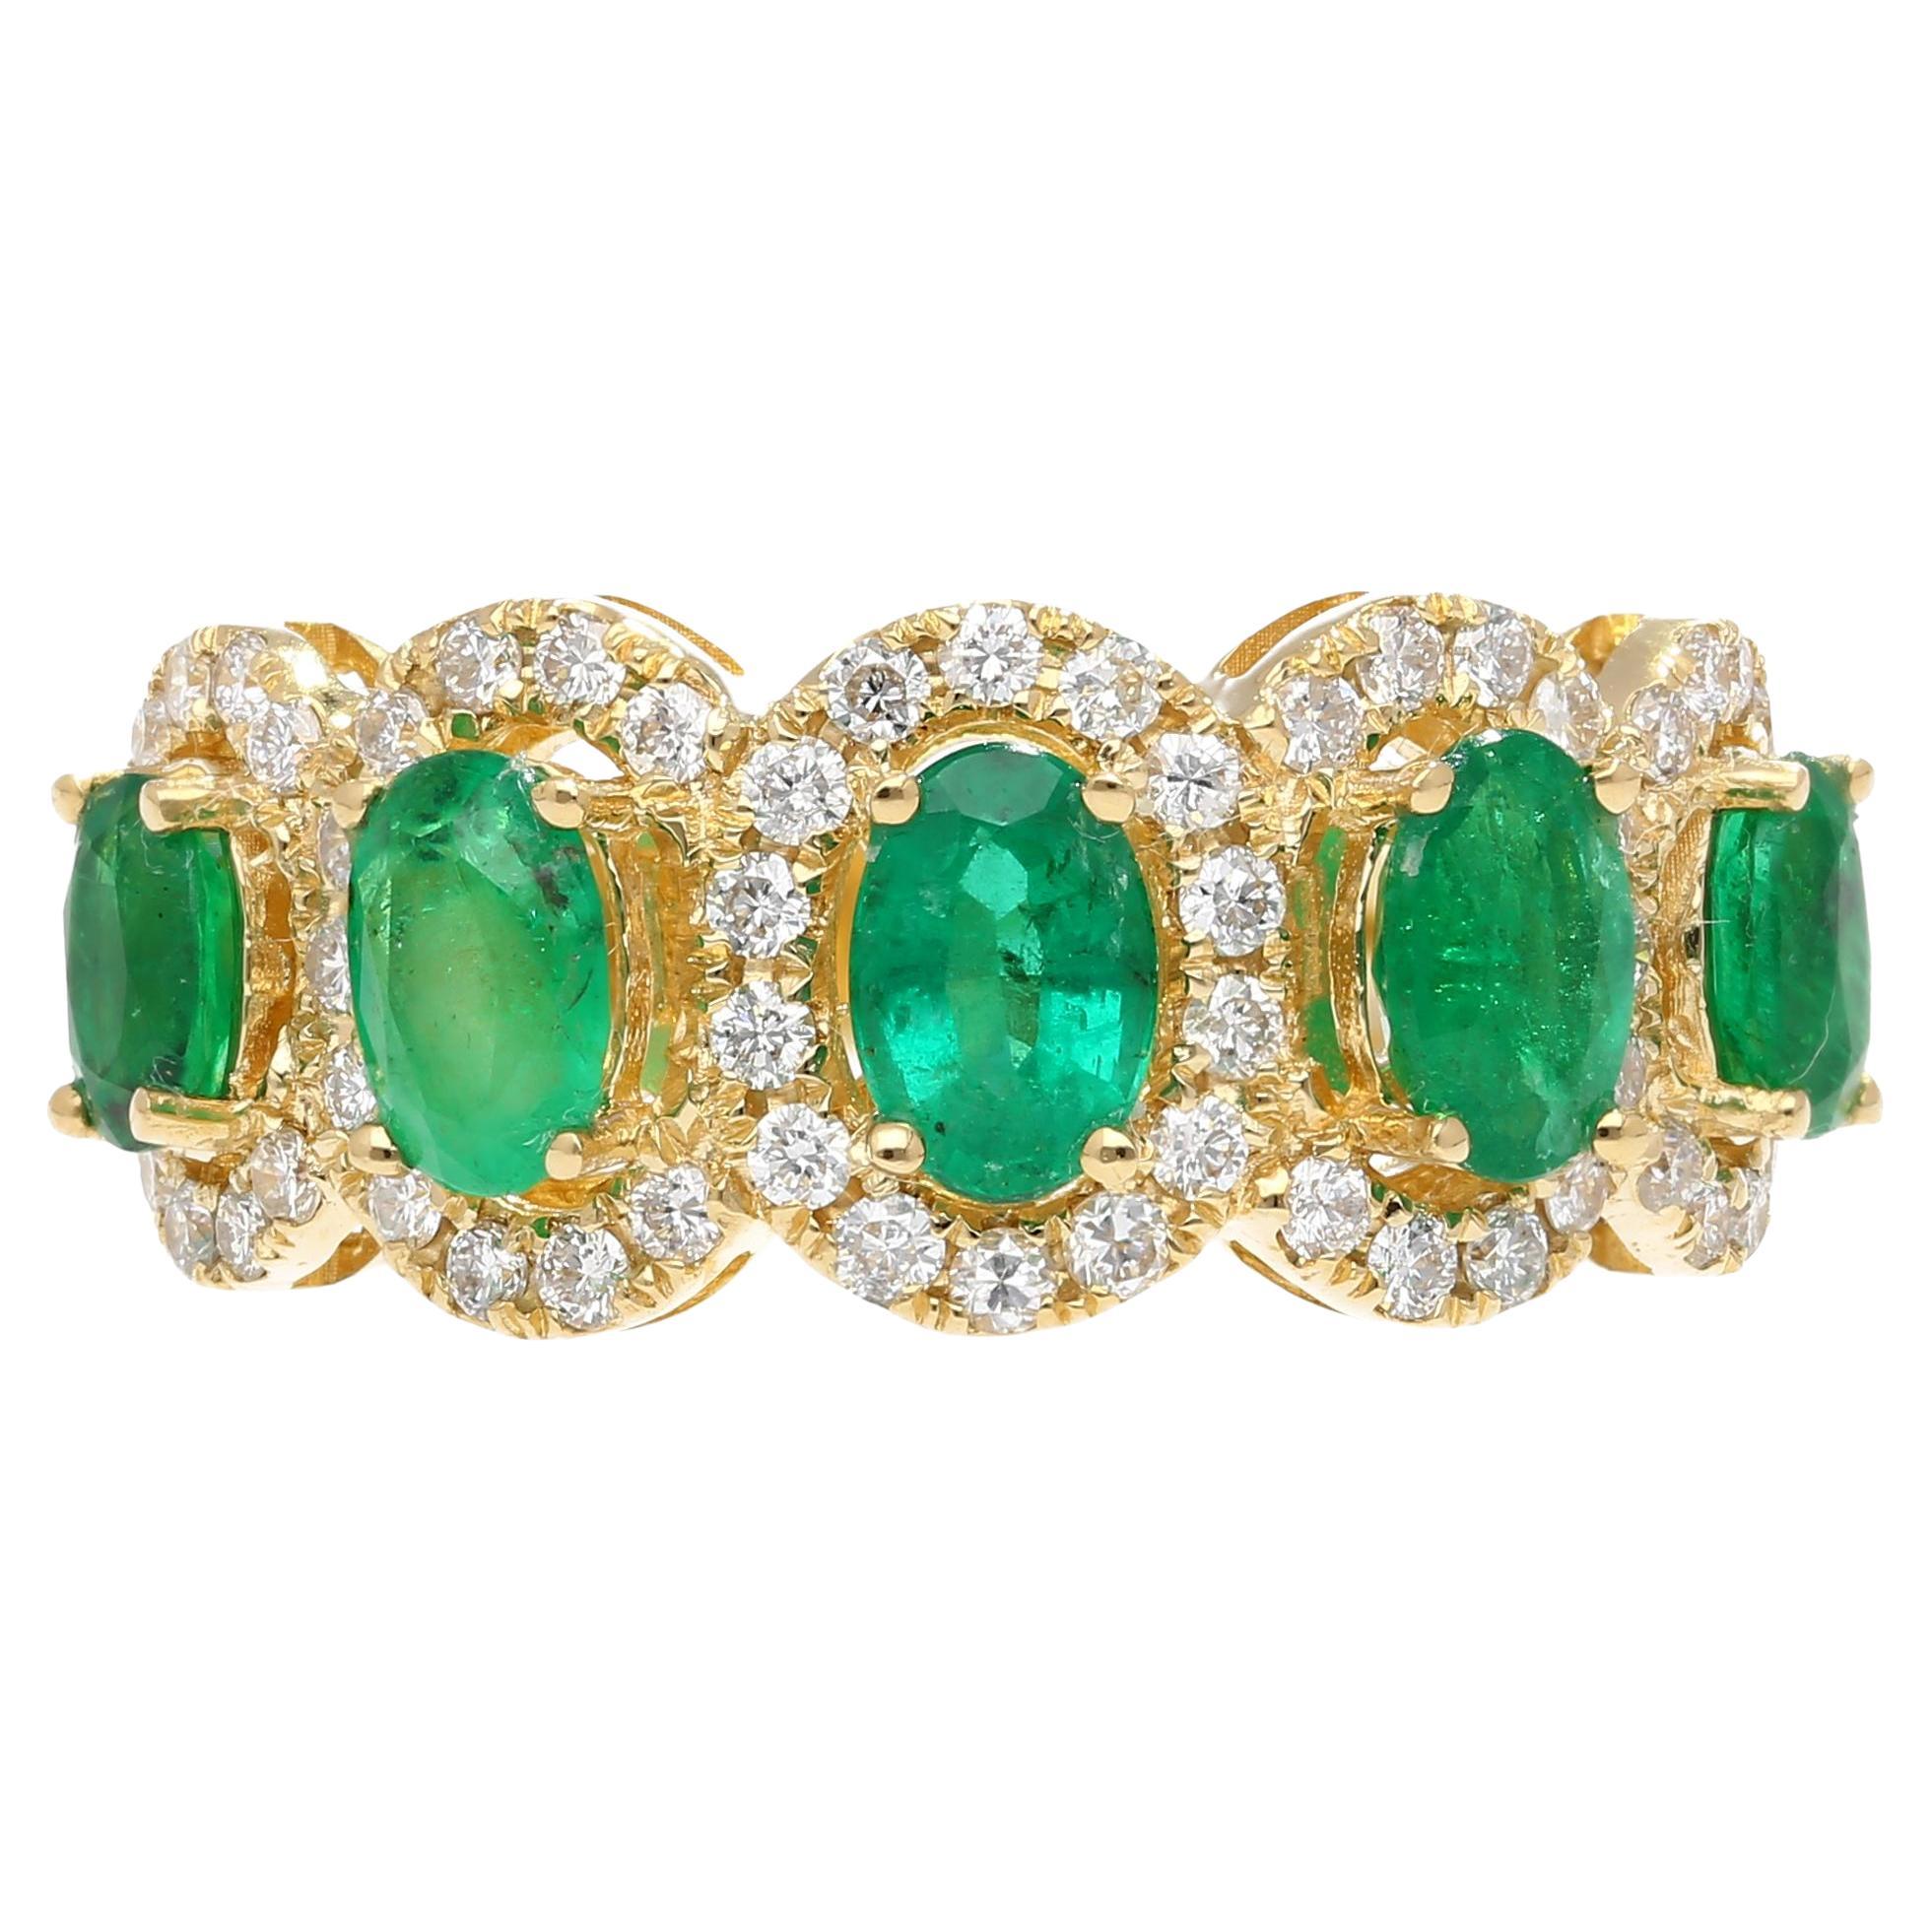 2.29 Carat Oval Cut Emerald and Diamond Wedding Band in 18K Gold